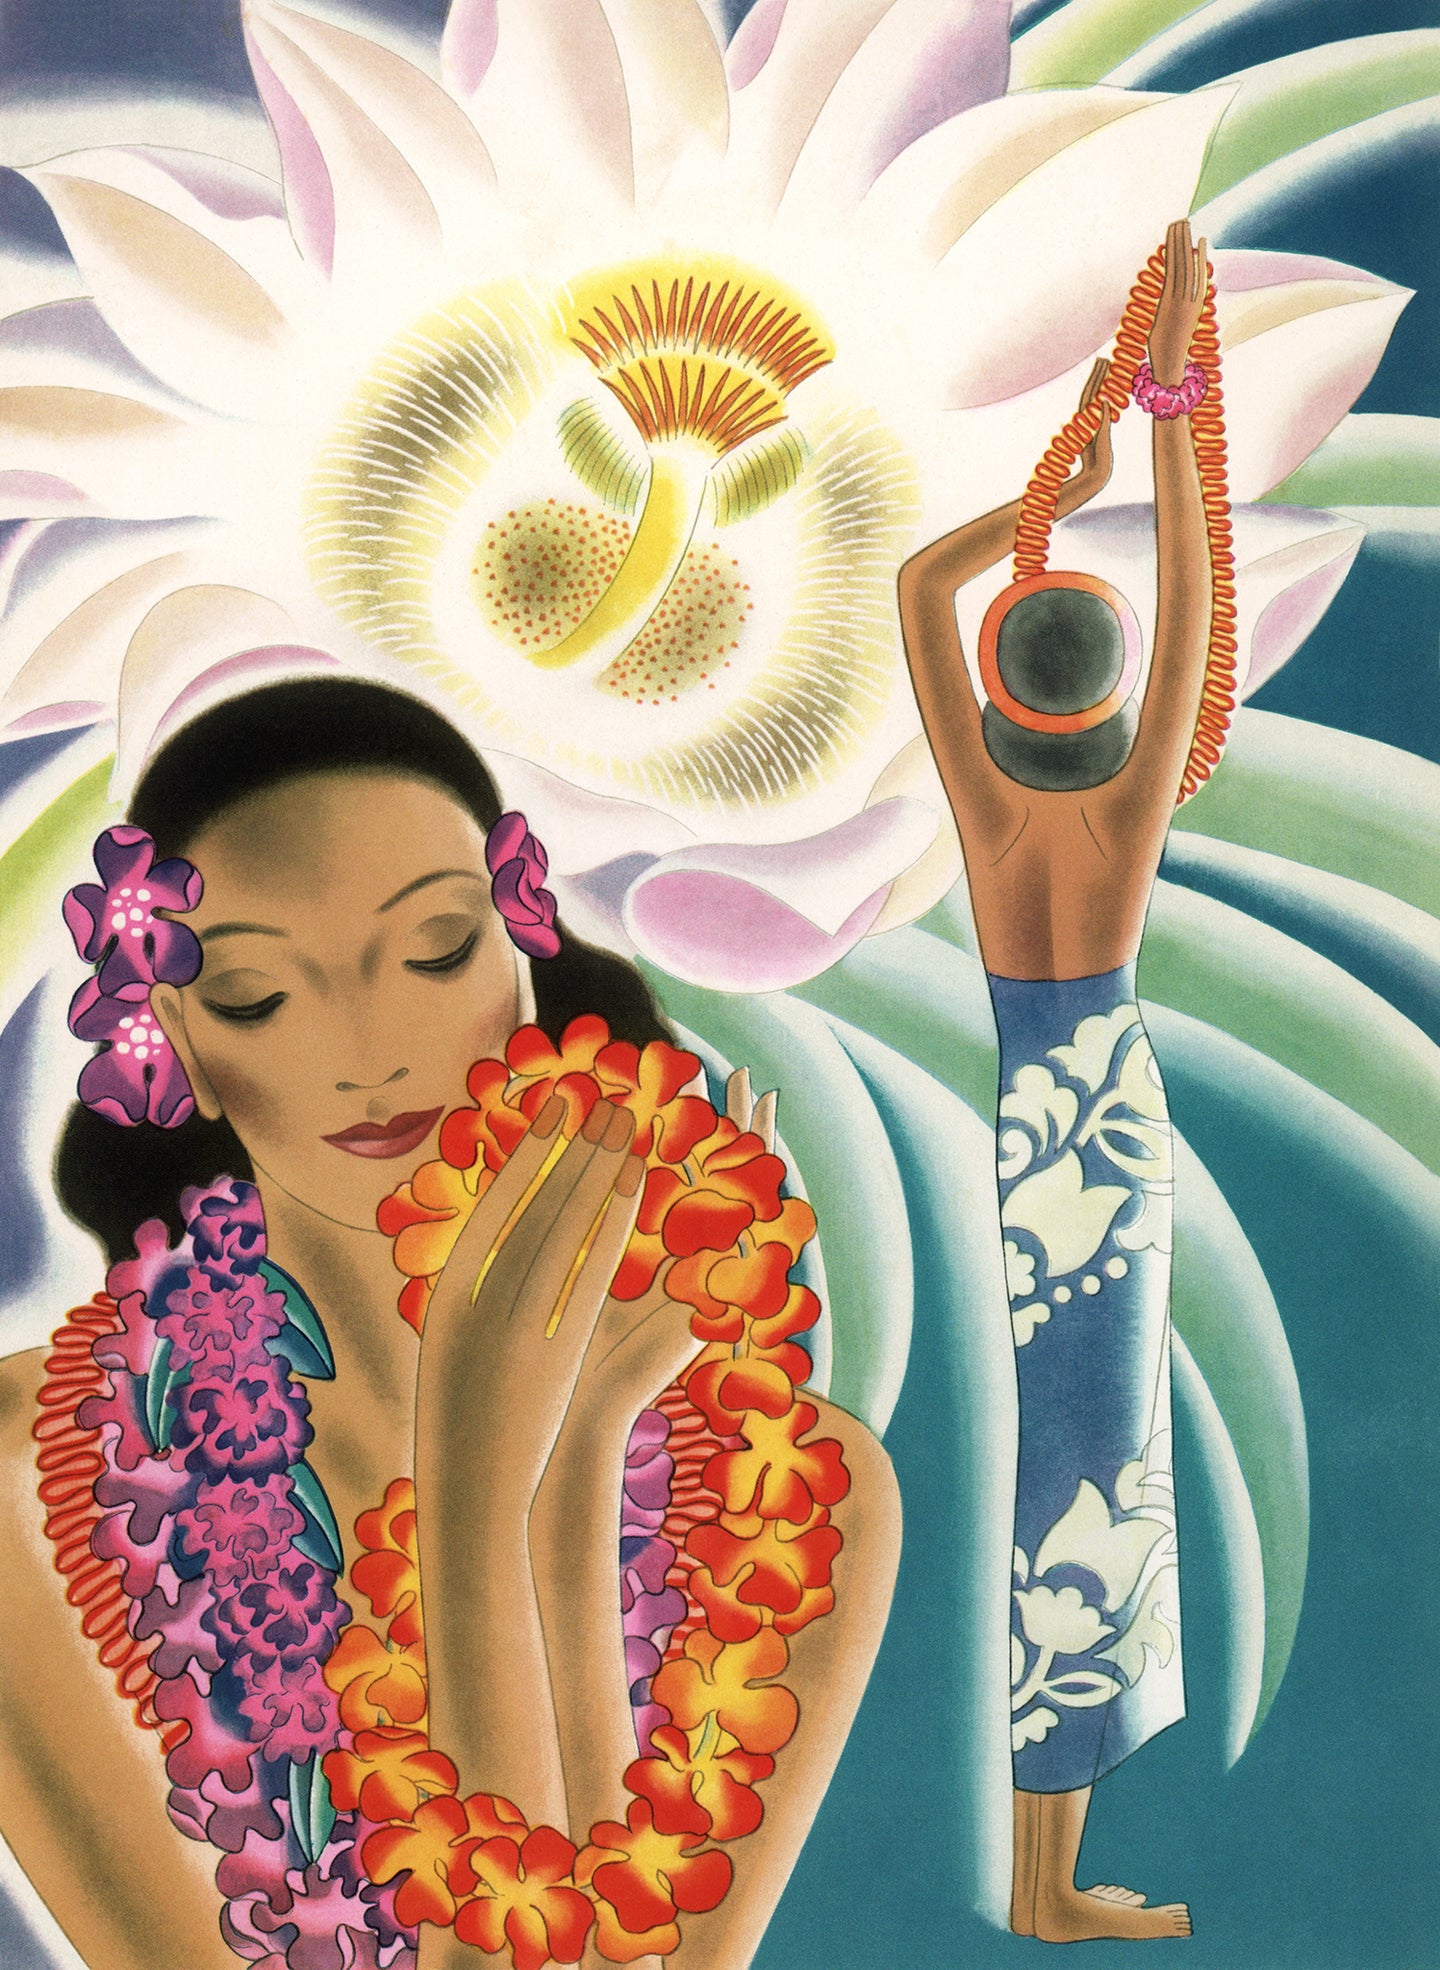 Vibrant artwork from Frank McIntosh of native Hawaiian woman wearing many flower leis and the back view of another woman in blue and white sarong holding up an orange lei. A large Cereus flower is in the background. 